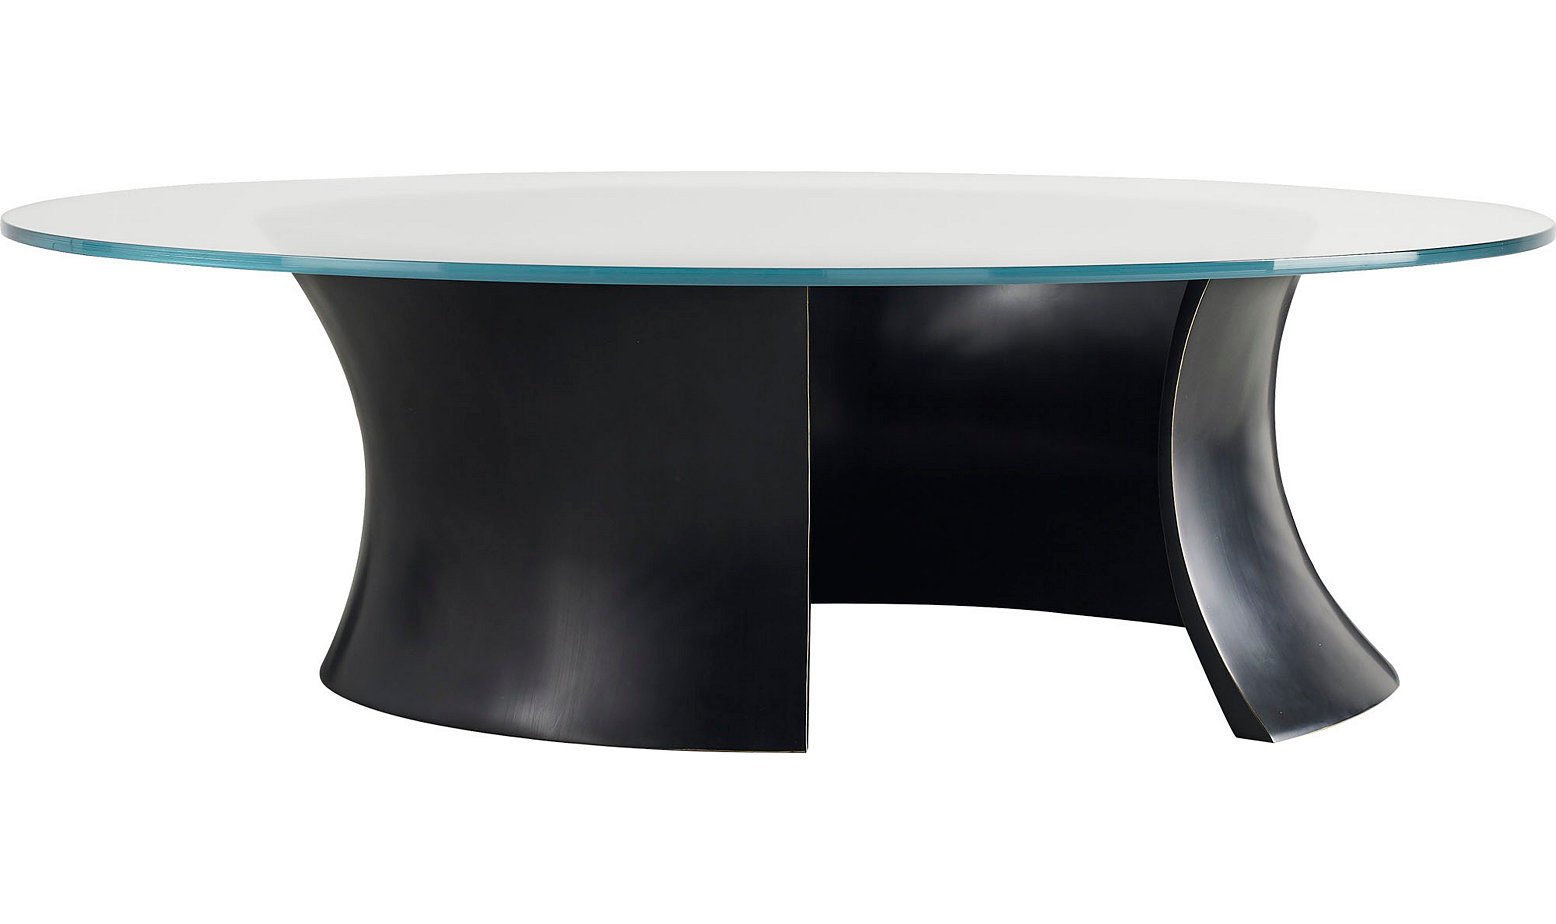 SCULTURA COCKTAIL TABLE